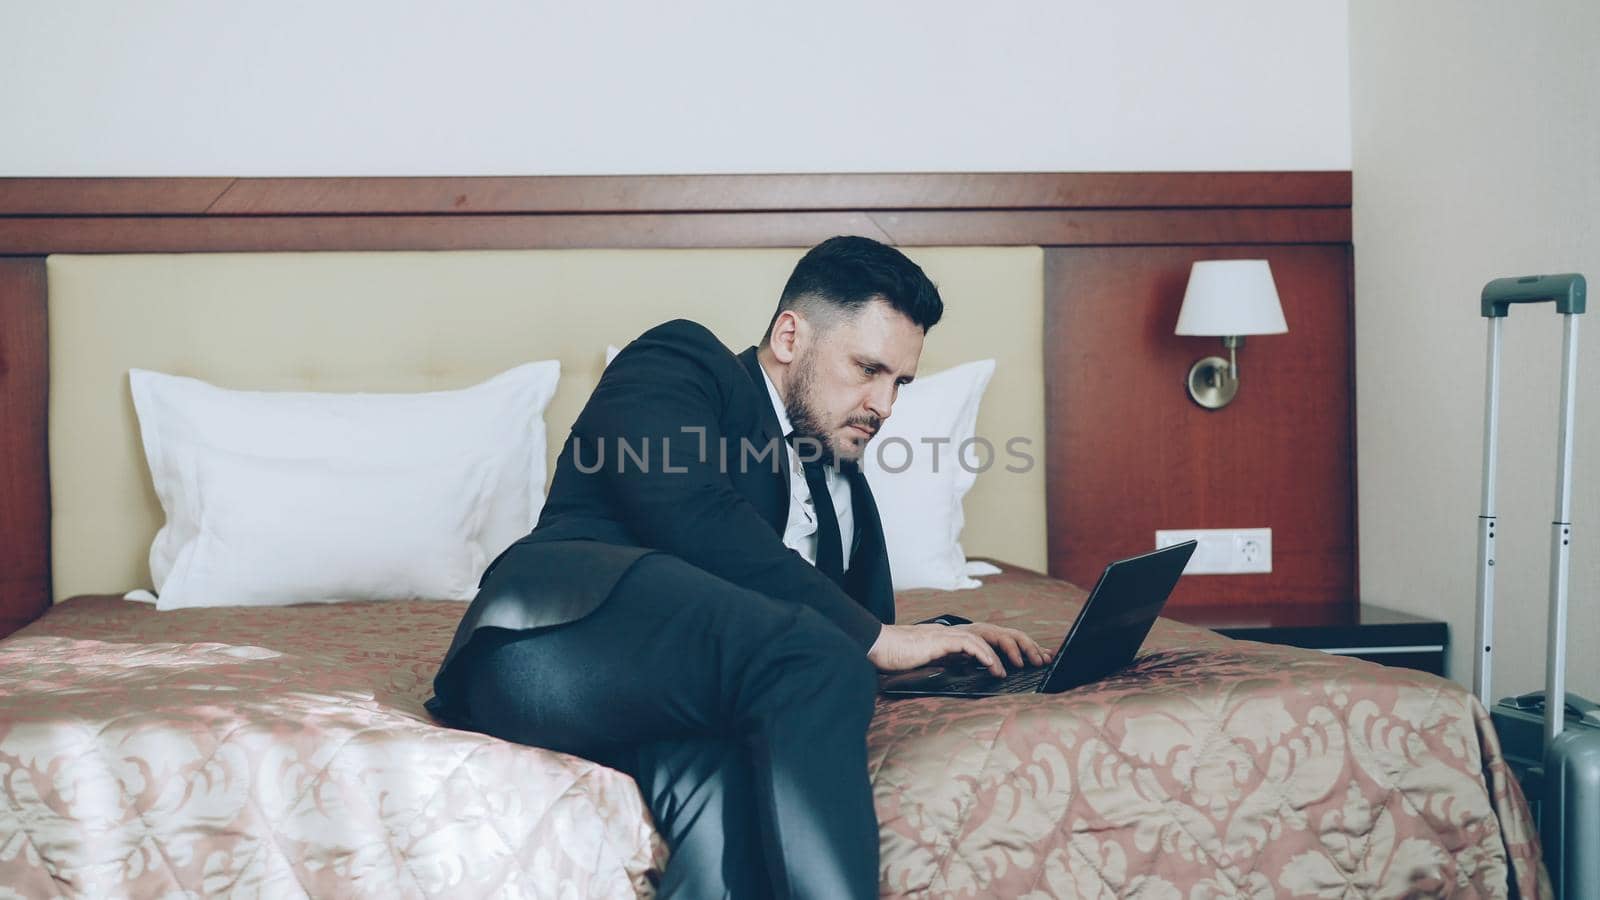 Pan shot of concentrated businessman in suit working on laptop while sitting on bed in hotel room. Business, travel and people concept by silverkblack